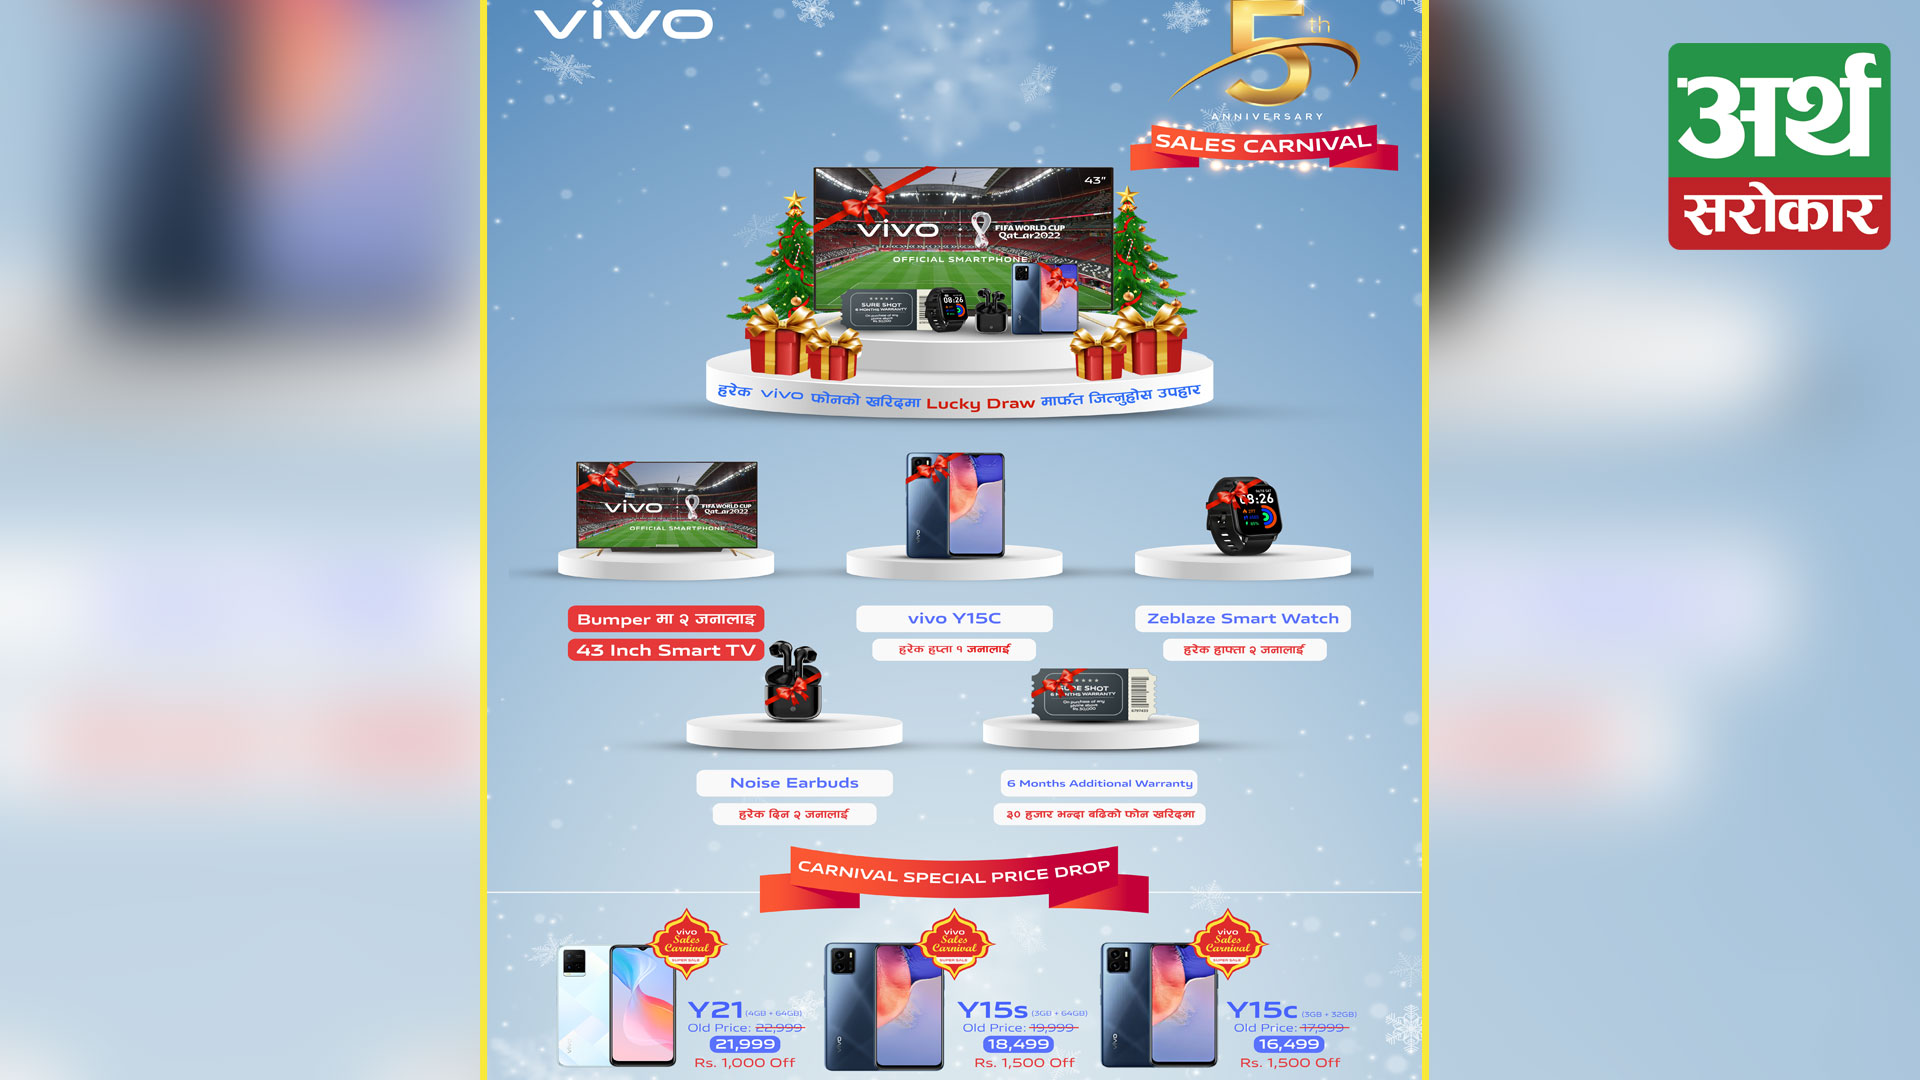 Vivo is all set to commemorate its 5th Anniversary with the biggest Sales Carnival offering exciting prizes and offers